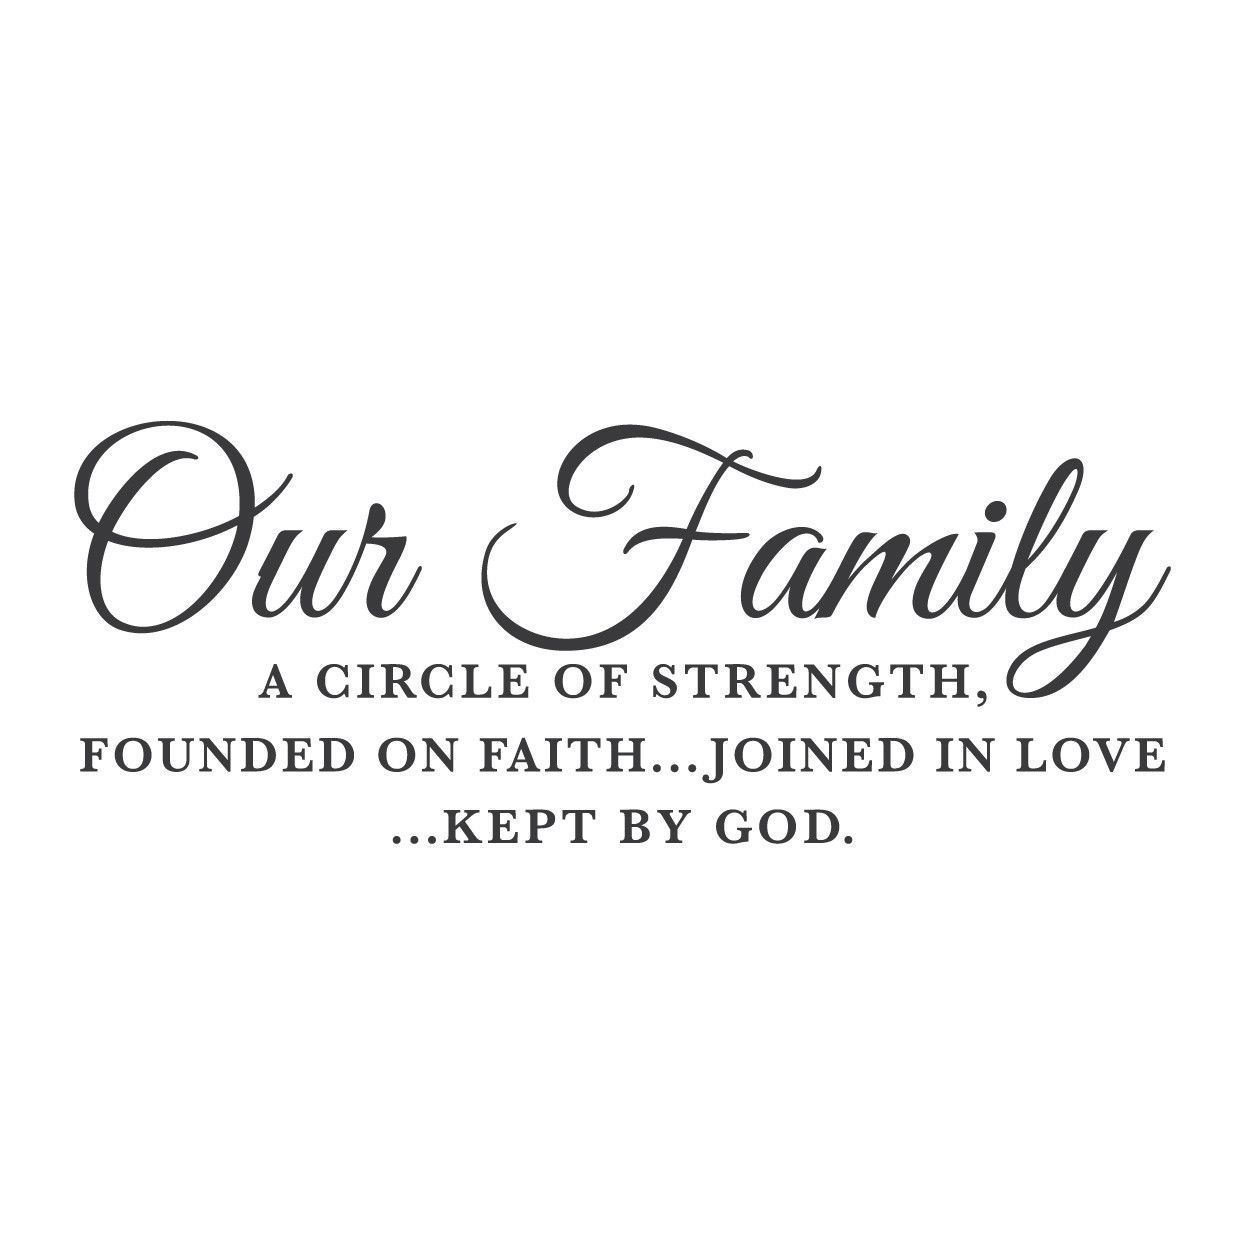 Wall Quotes Wall Decals – “Our Family, A Circle of Strength”